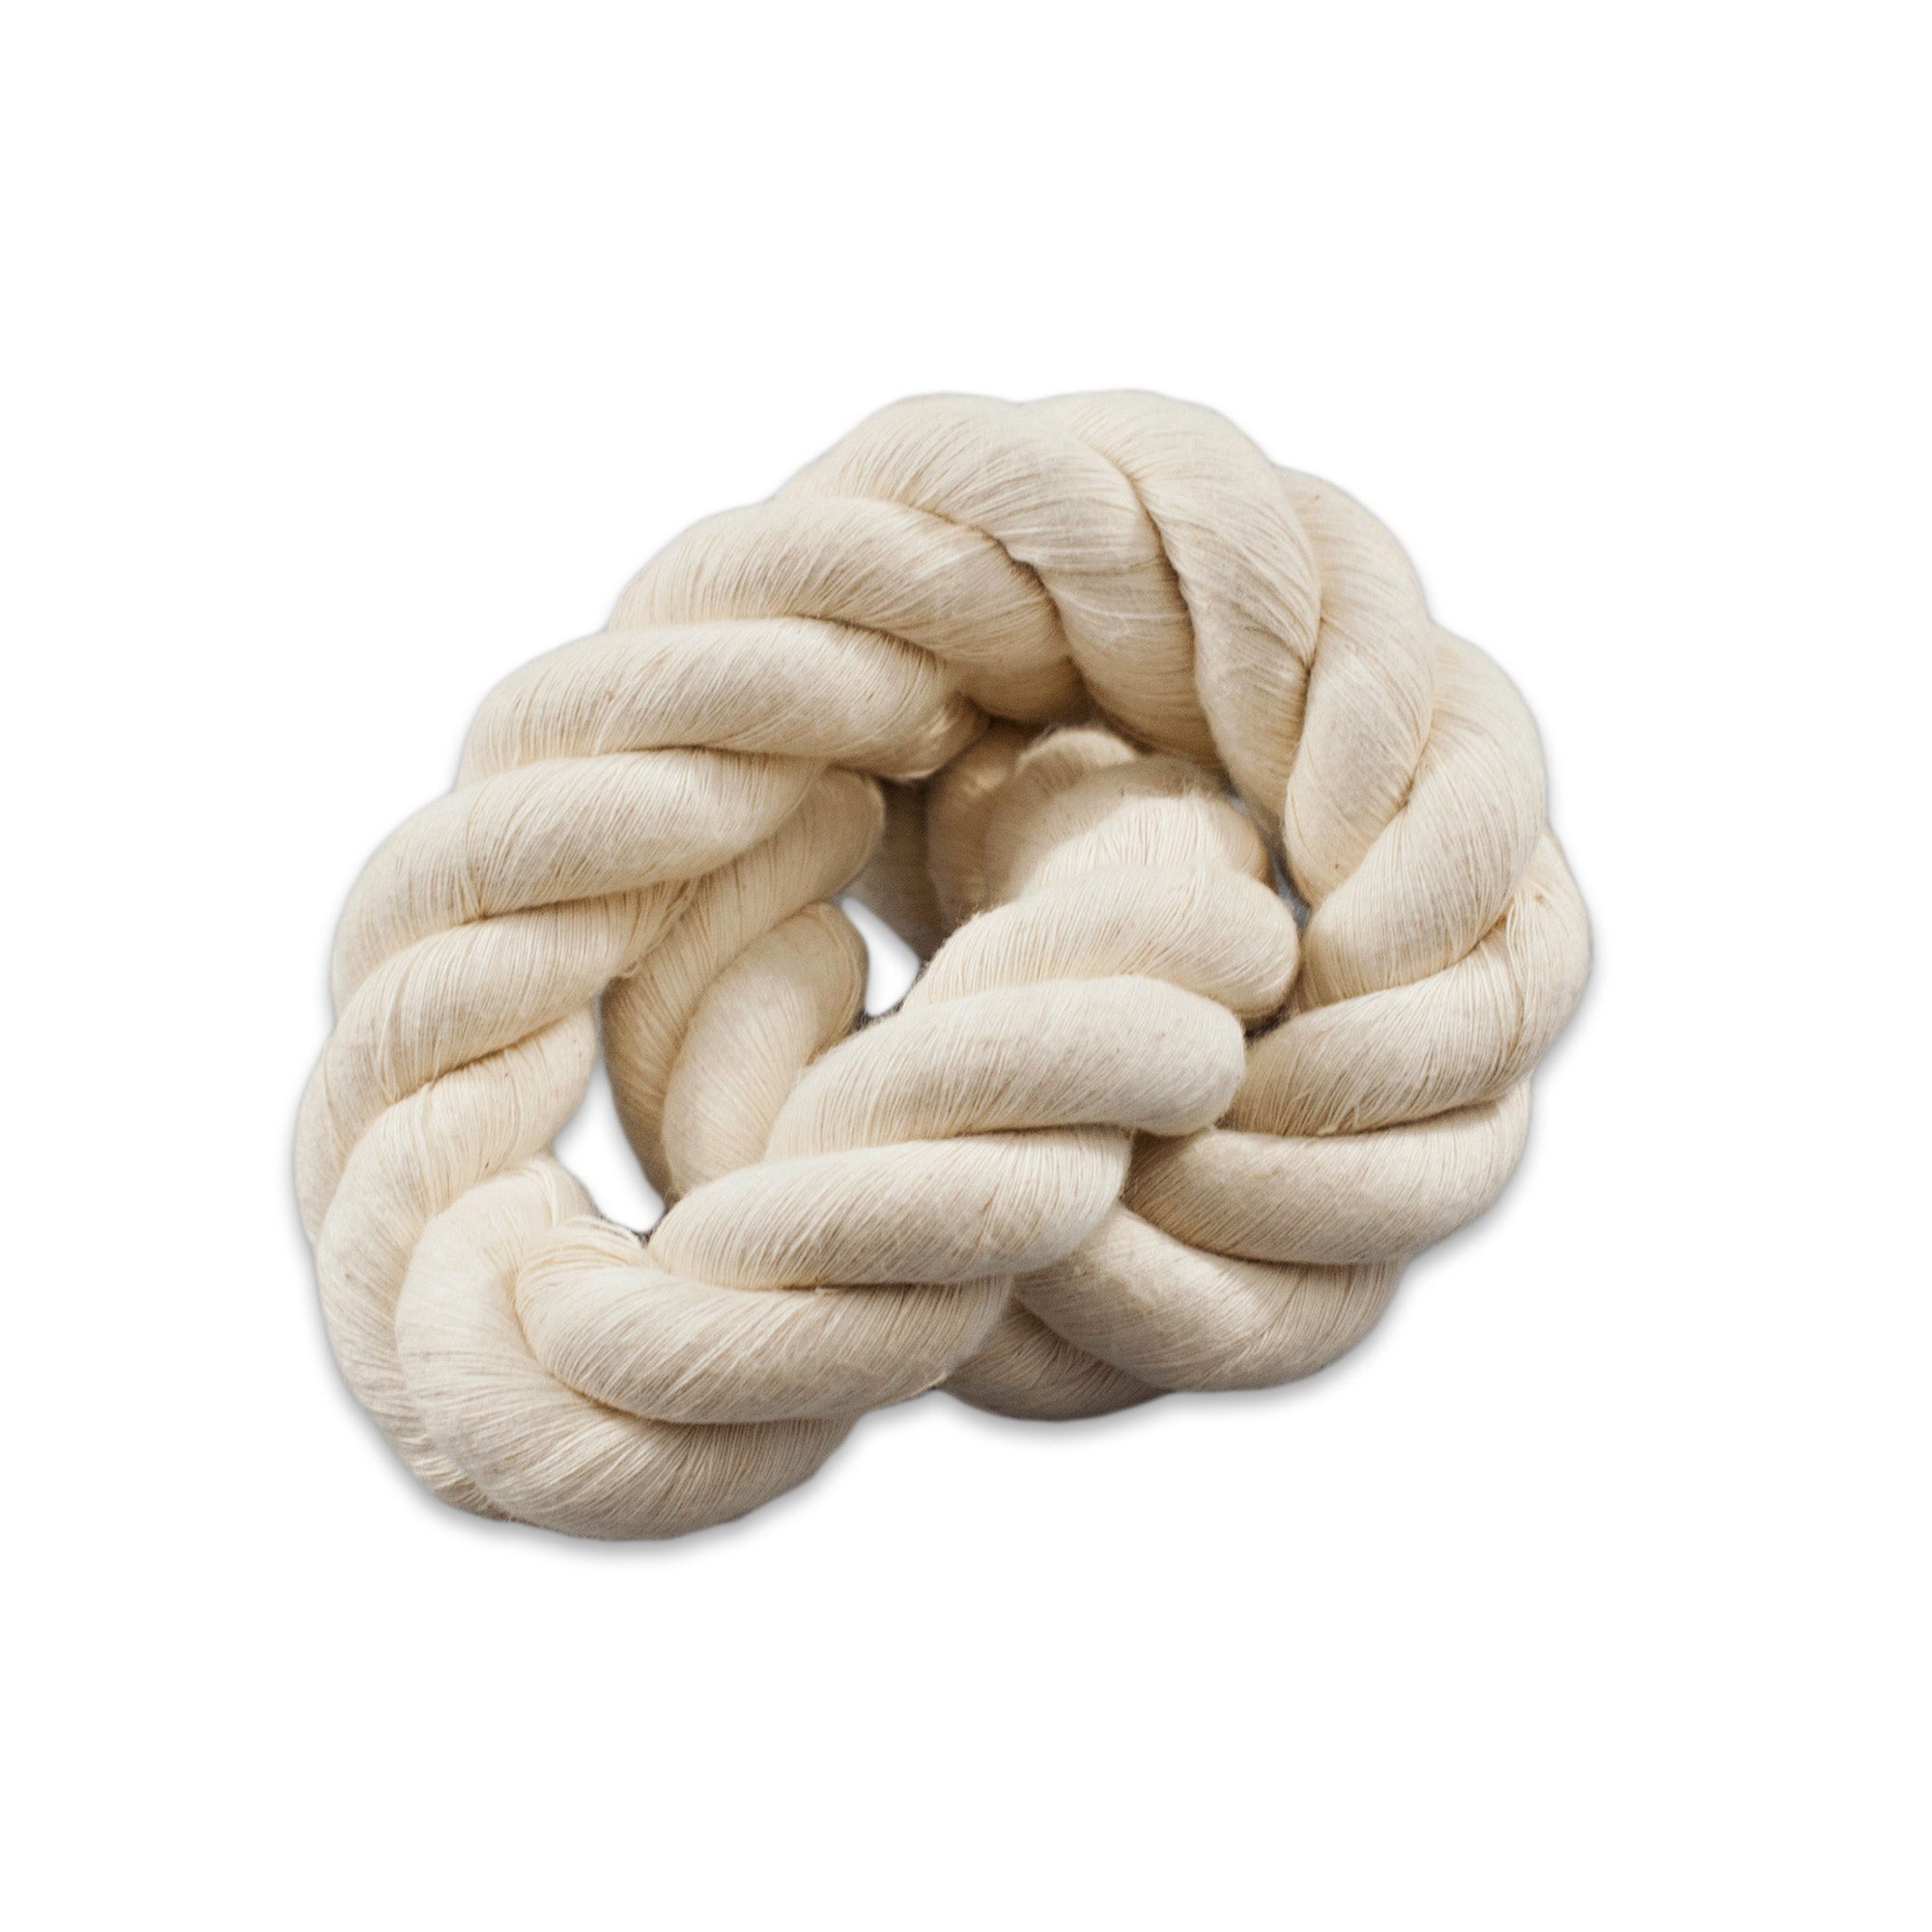 1/4 Twisted Cotton Rope Kit - Flora - 40